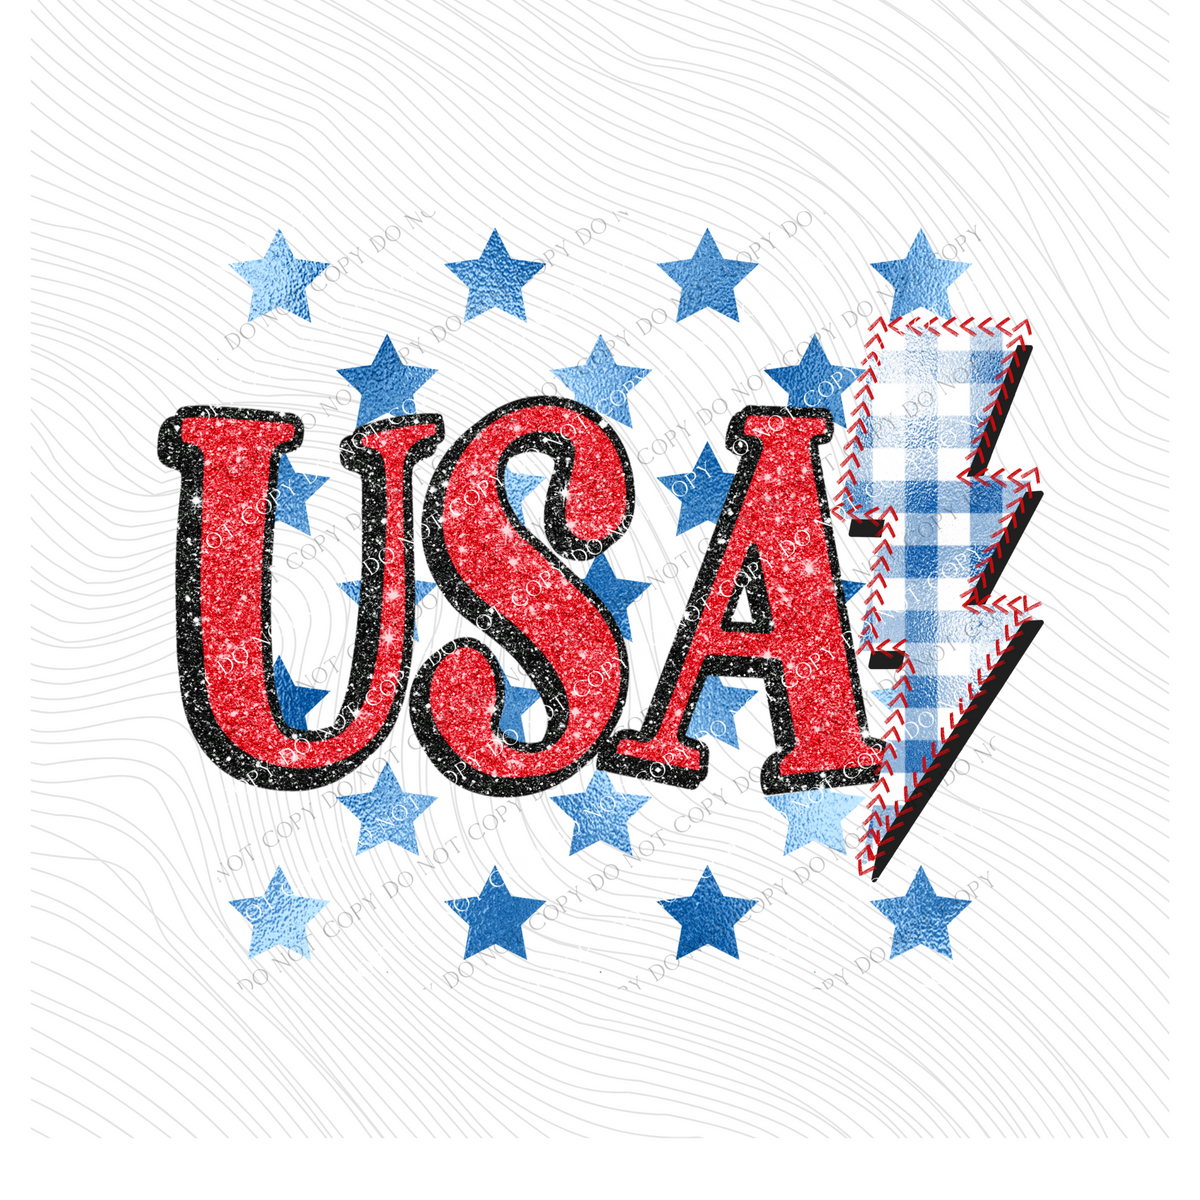 USA Glitter with Foil Stars & Gingham Stitched Bolt in Red, White & Blue Patriotic Digital Design, PNG